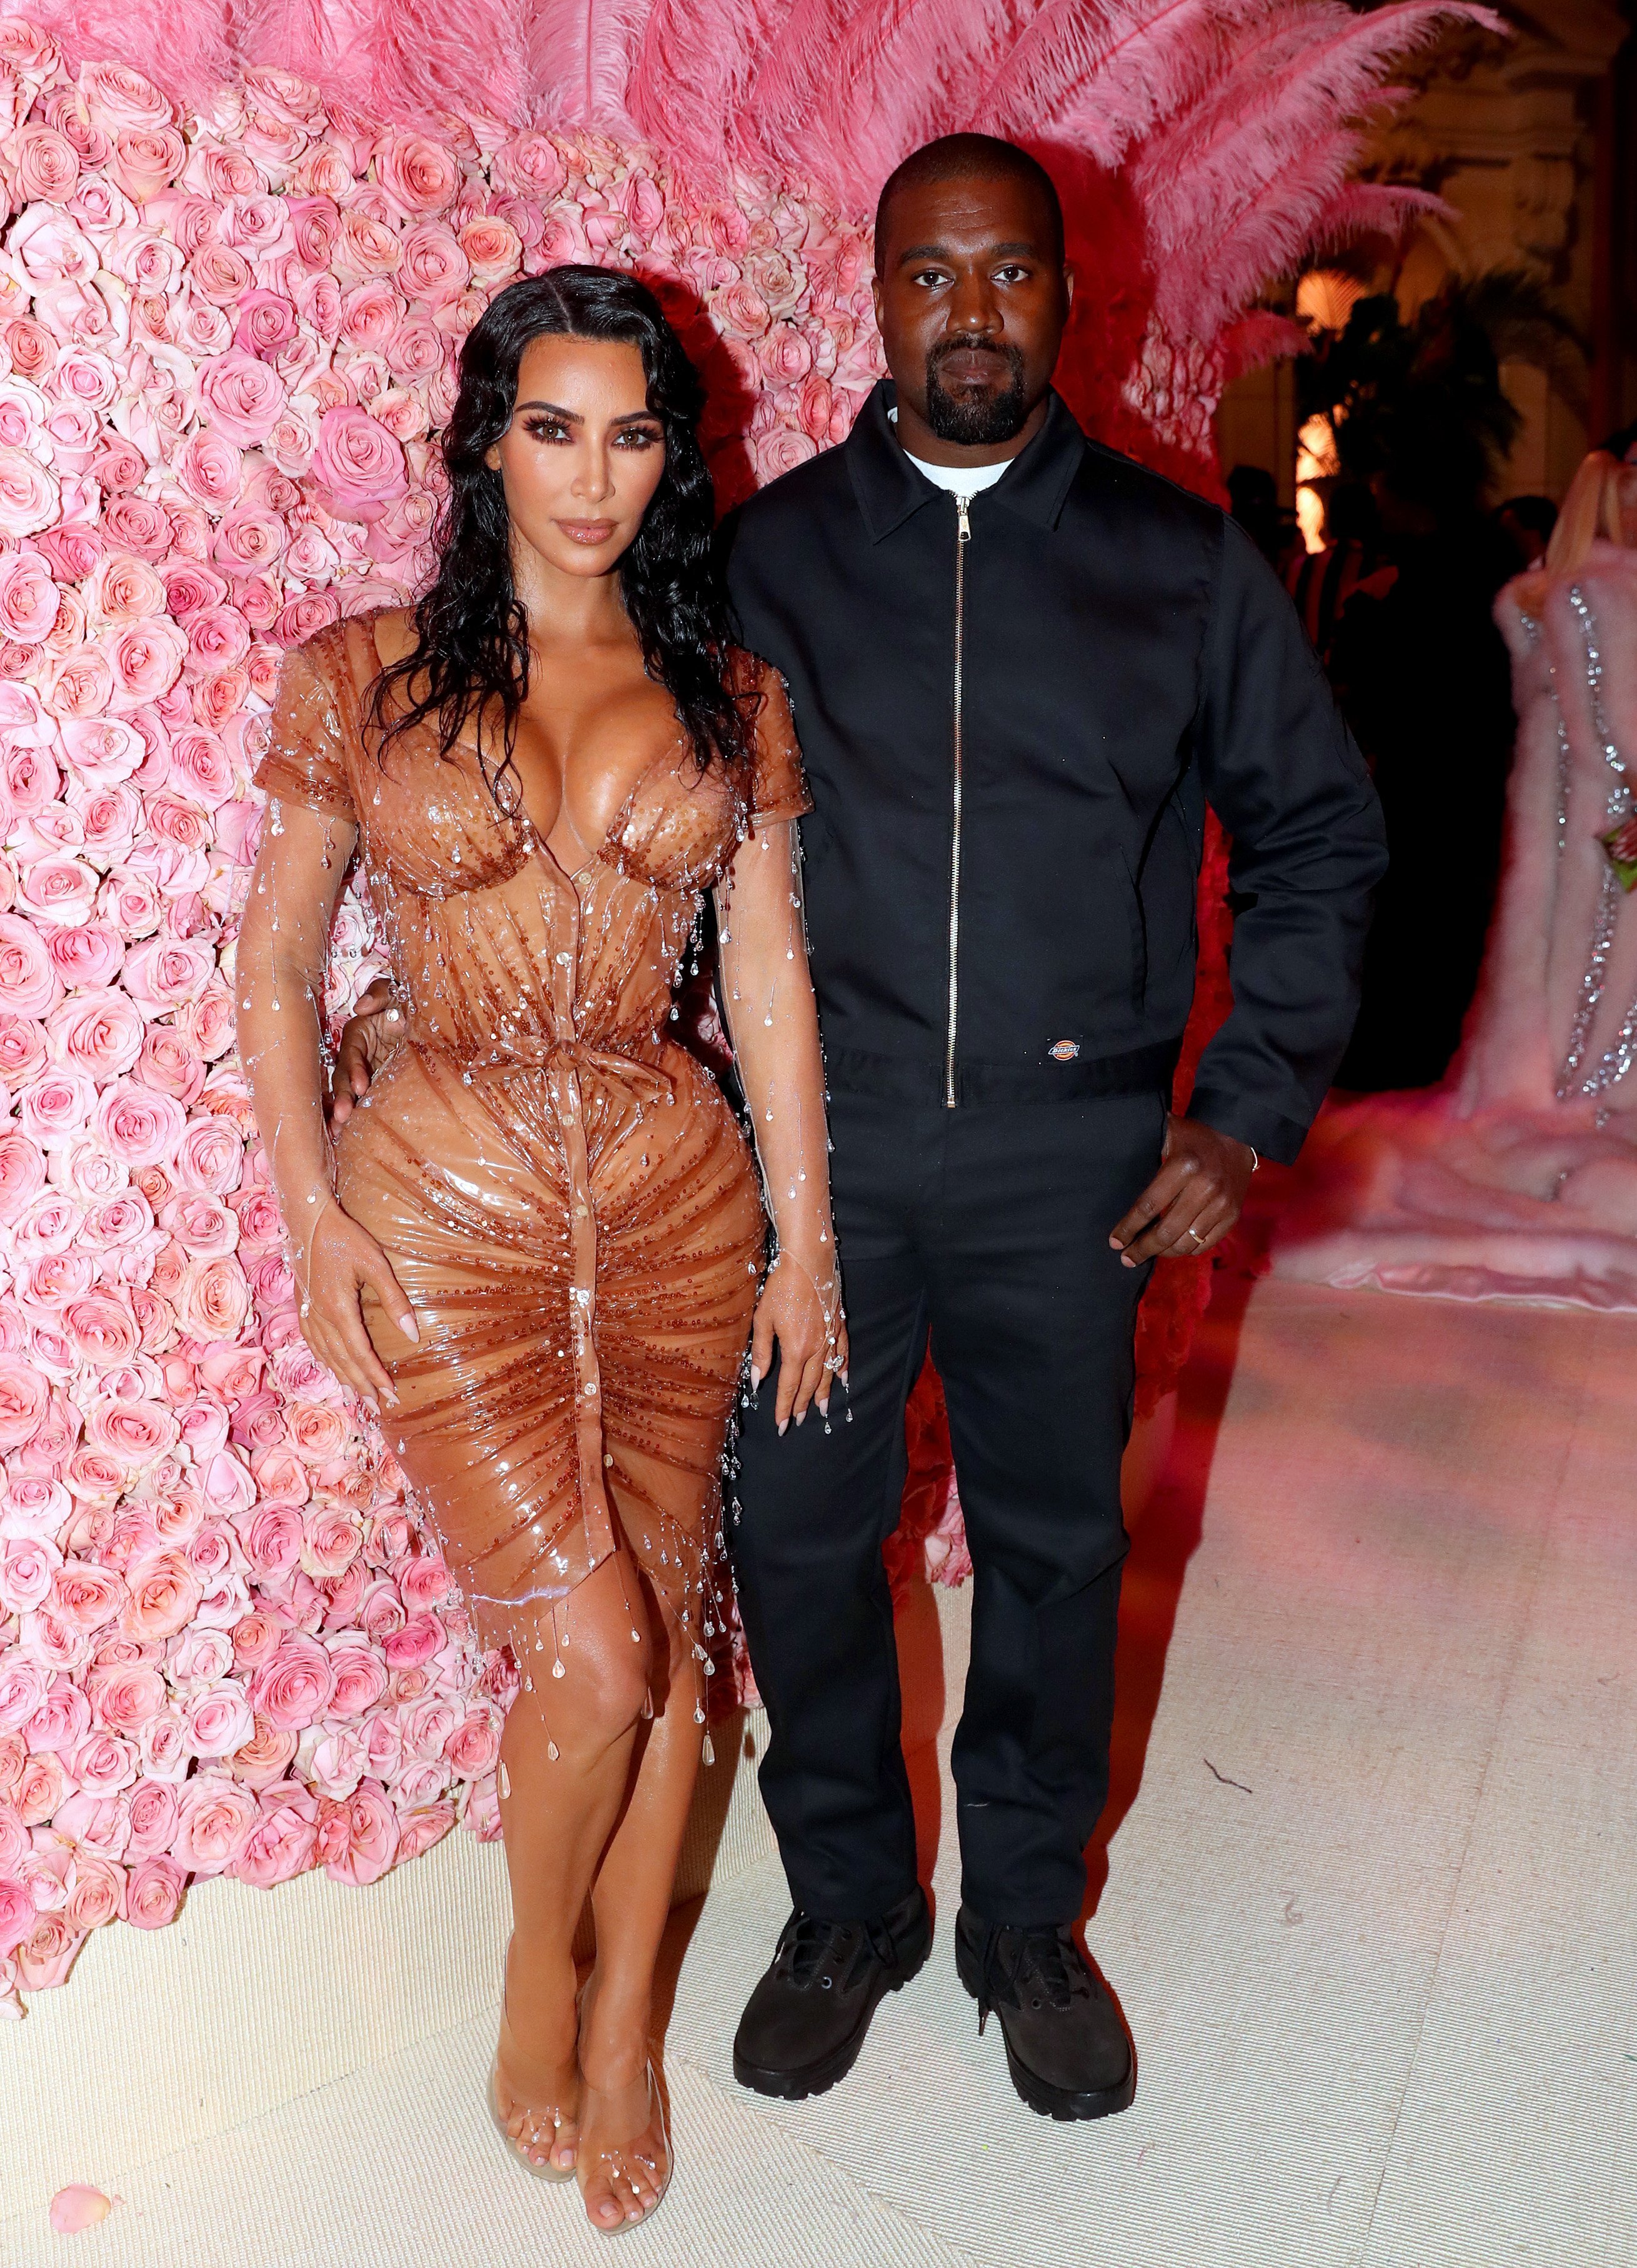 Kim Kardashian and Kanye West at the 2019 Met Gala | Photo: Getty Images